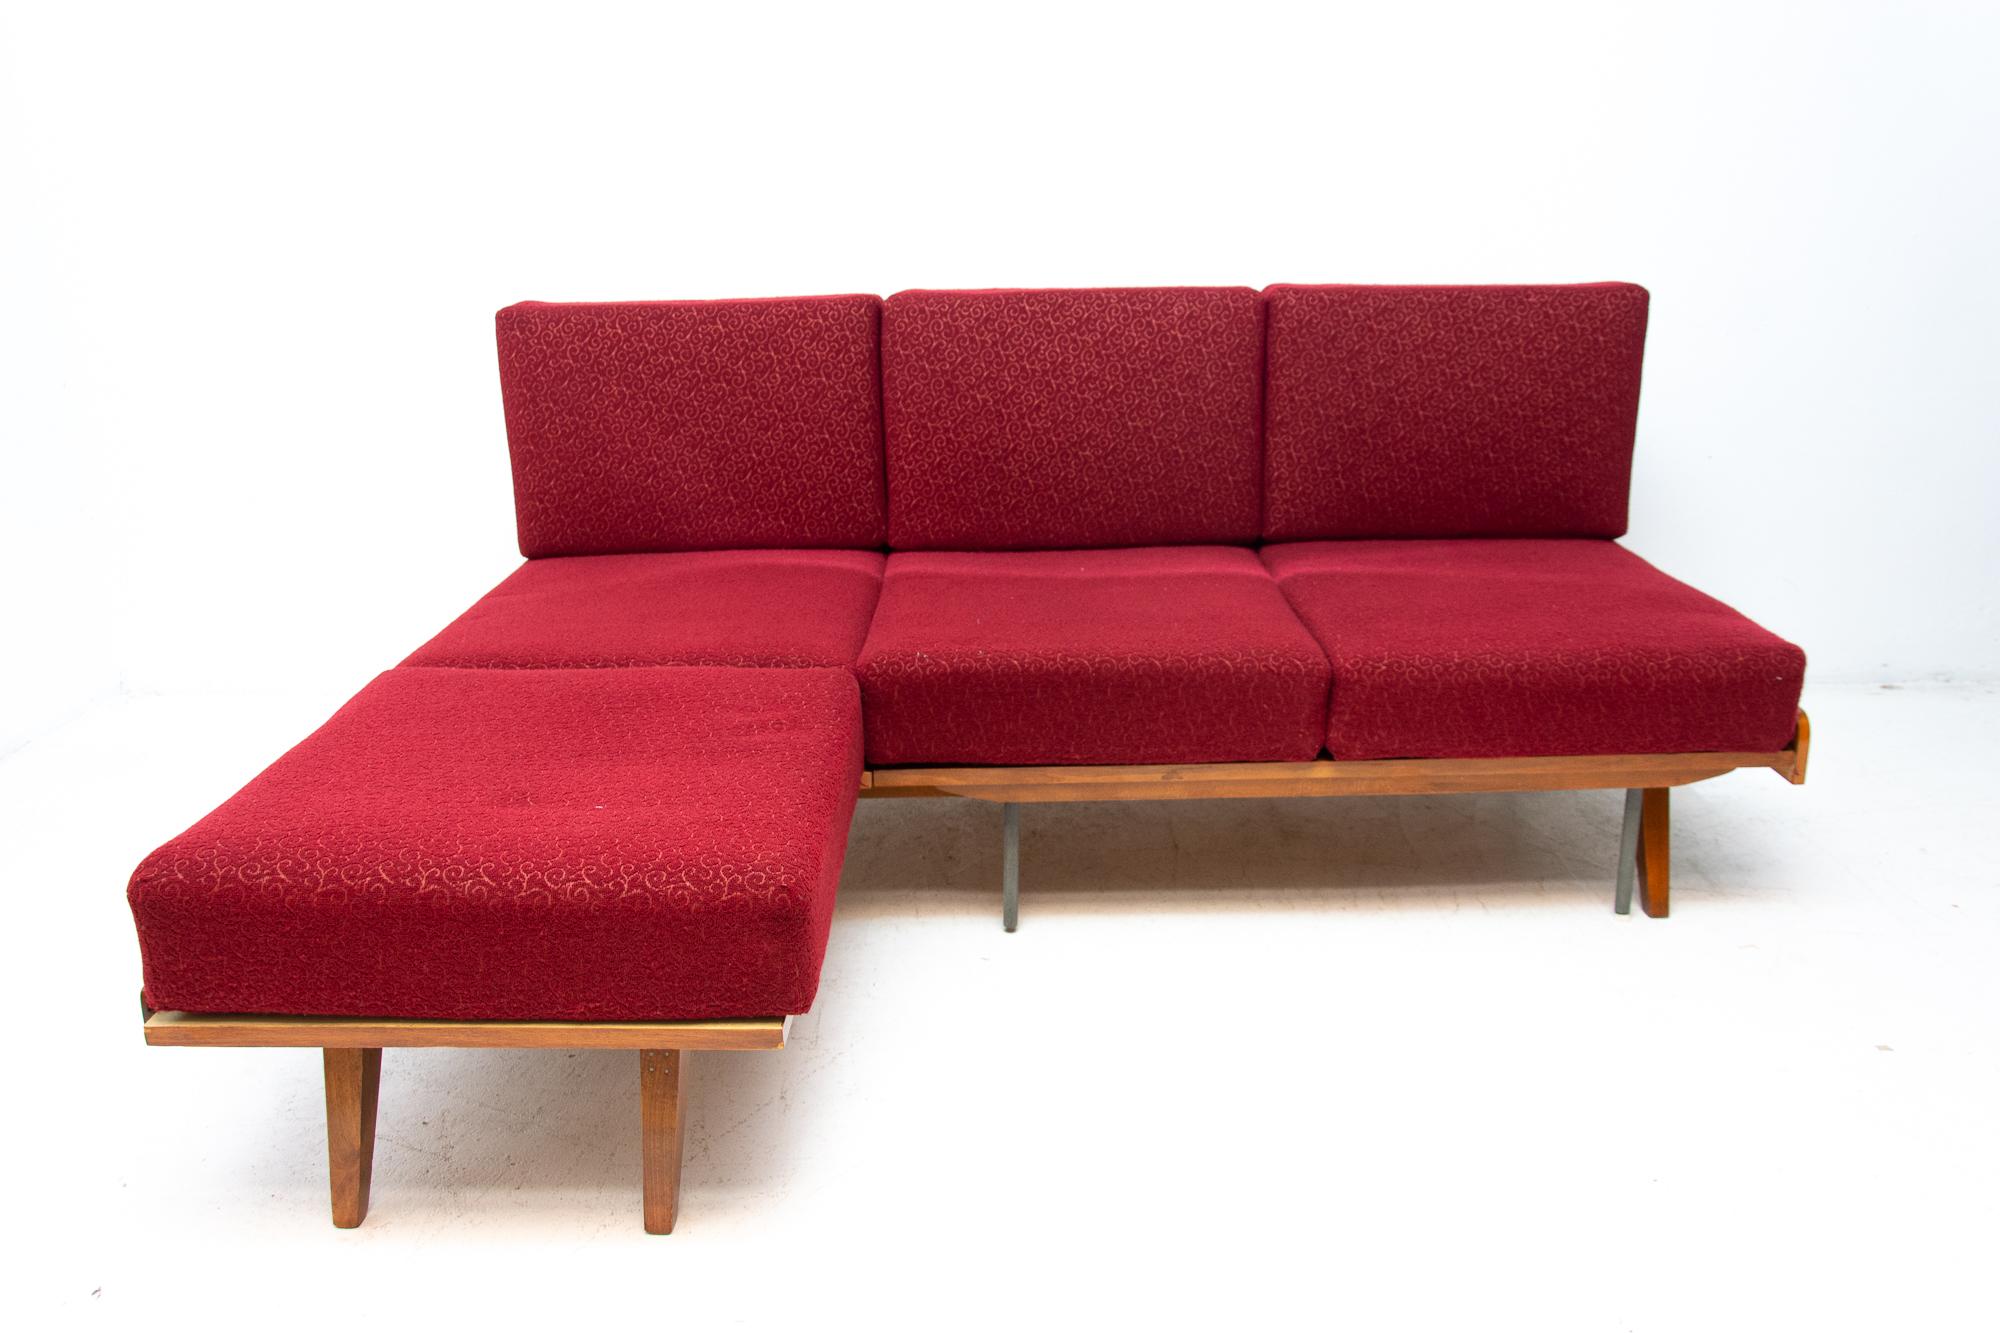 Midcentury corner folding sofa designed by František Jirák for Tatra nábytok. It was made in the former Czechoslovakia in the 1960s. This sofa features a wooden structure that is veneered in walnut. The sofa is in very good vintage condition. Only